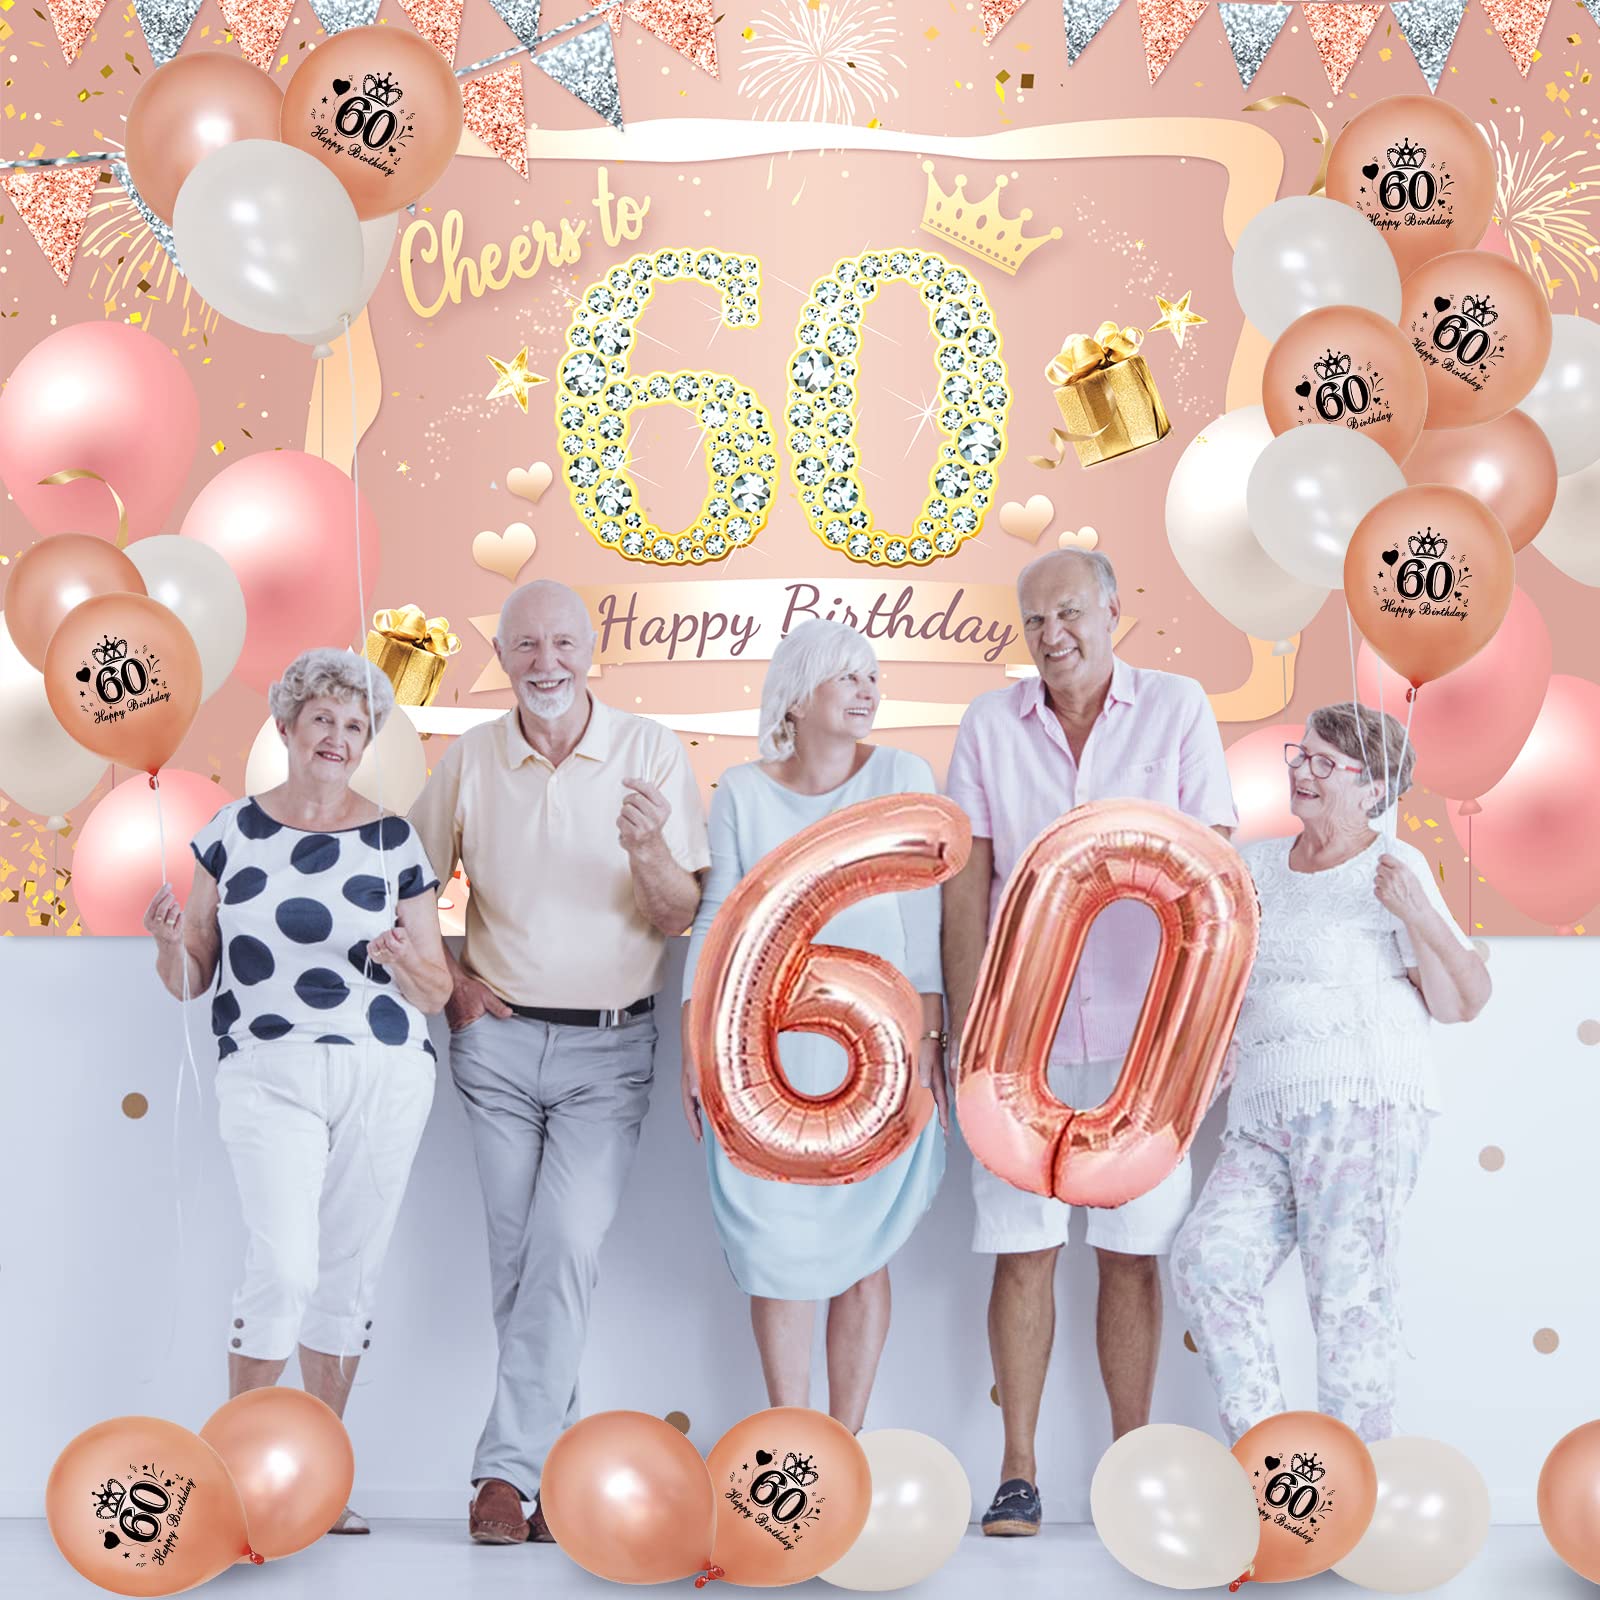 60th Birthday Decorations Women, Including Pink Rose Gold 60th Birthday Banner Backdrop Decor, Number 60th Birthday Balloon, 70 Pieces Rose Gold Balloon Arch Garland Kit for 60th Birthday